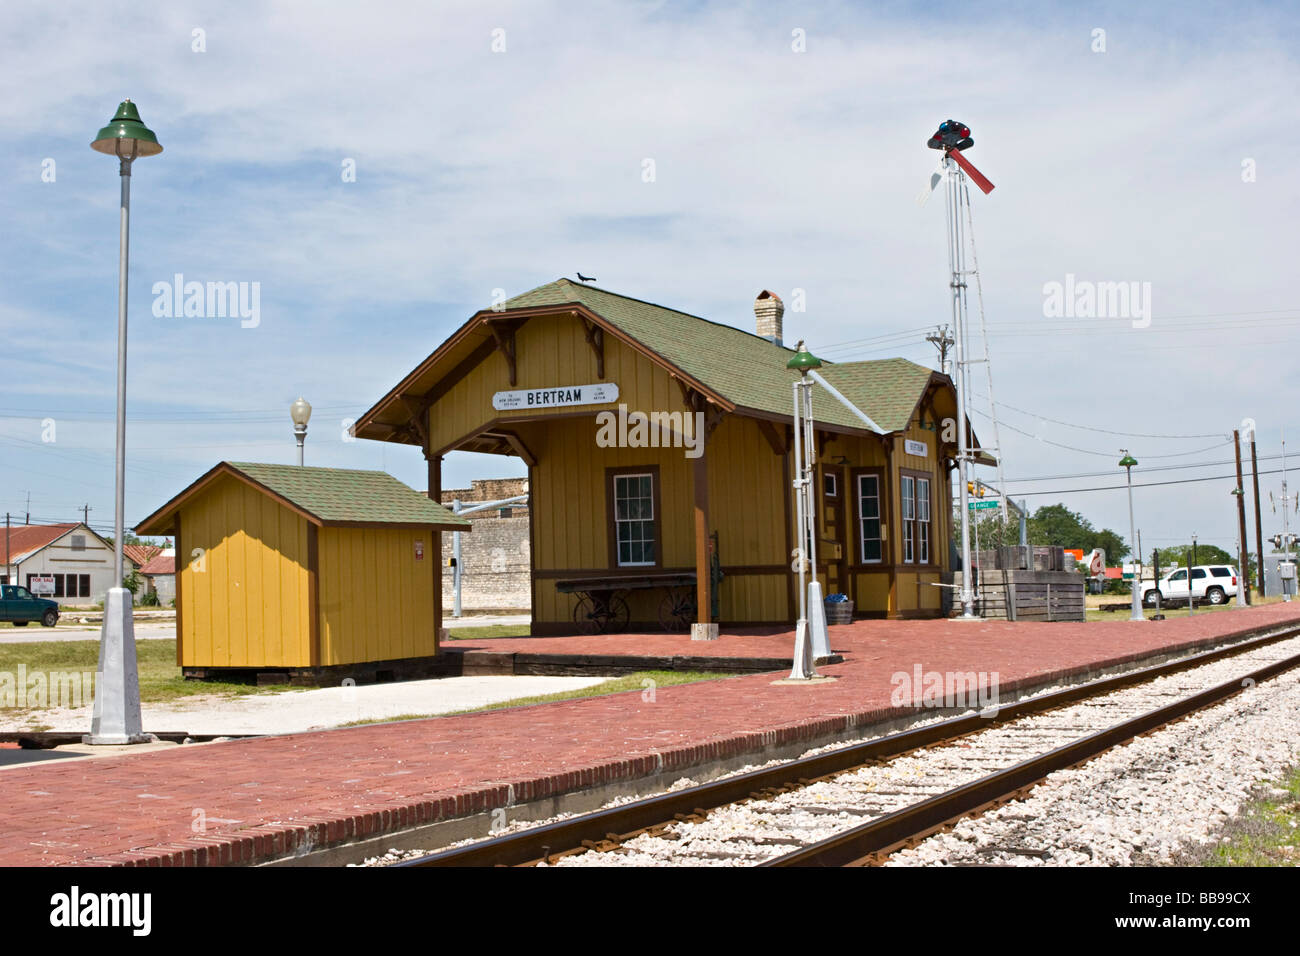 Small town railroad passenger train station with tracks, semaphore signal, mail catcher mail crane, passenger platform and outbuildings Stock Photo